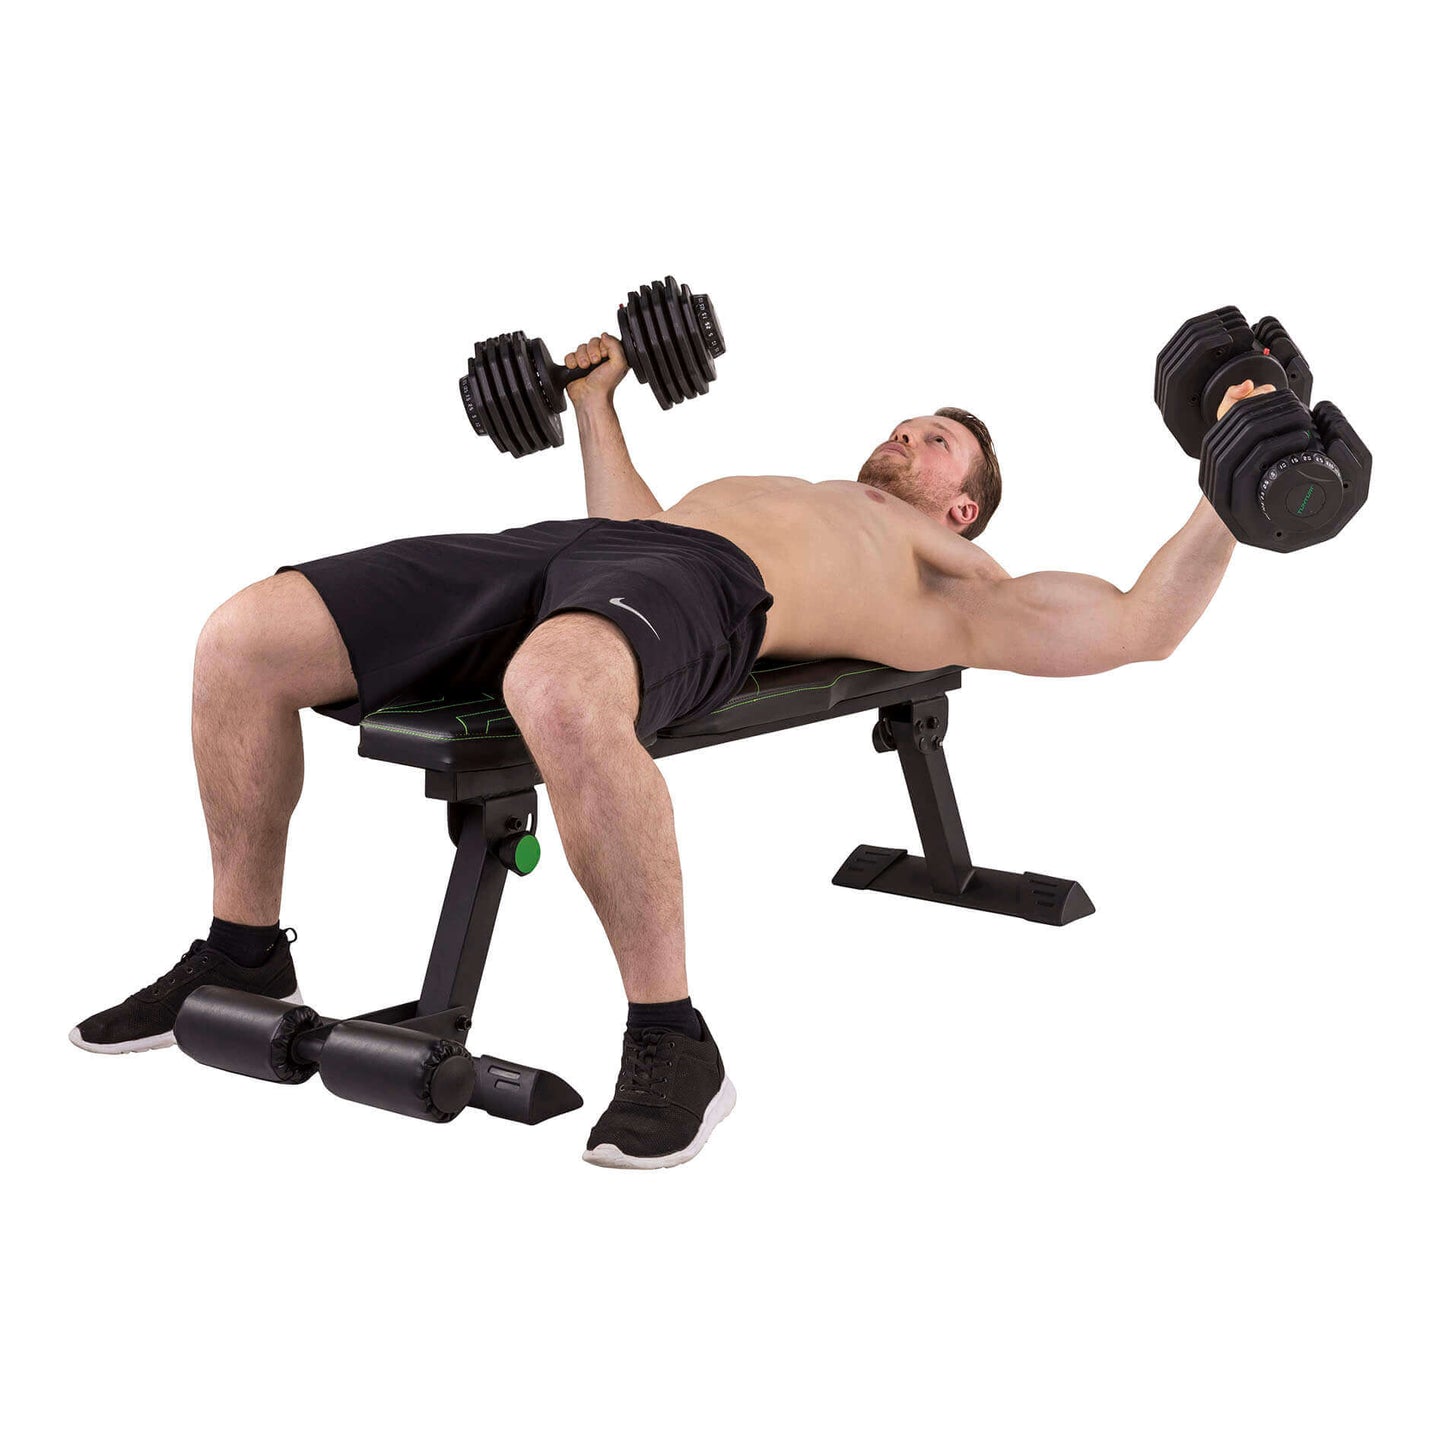 All In One Adjustable Weight Dumbbells